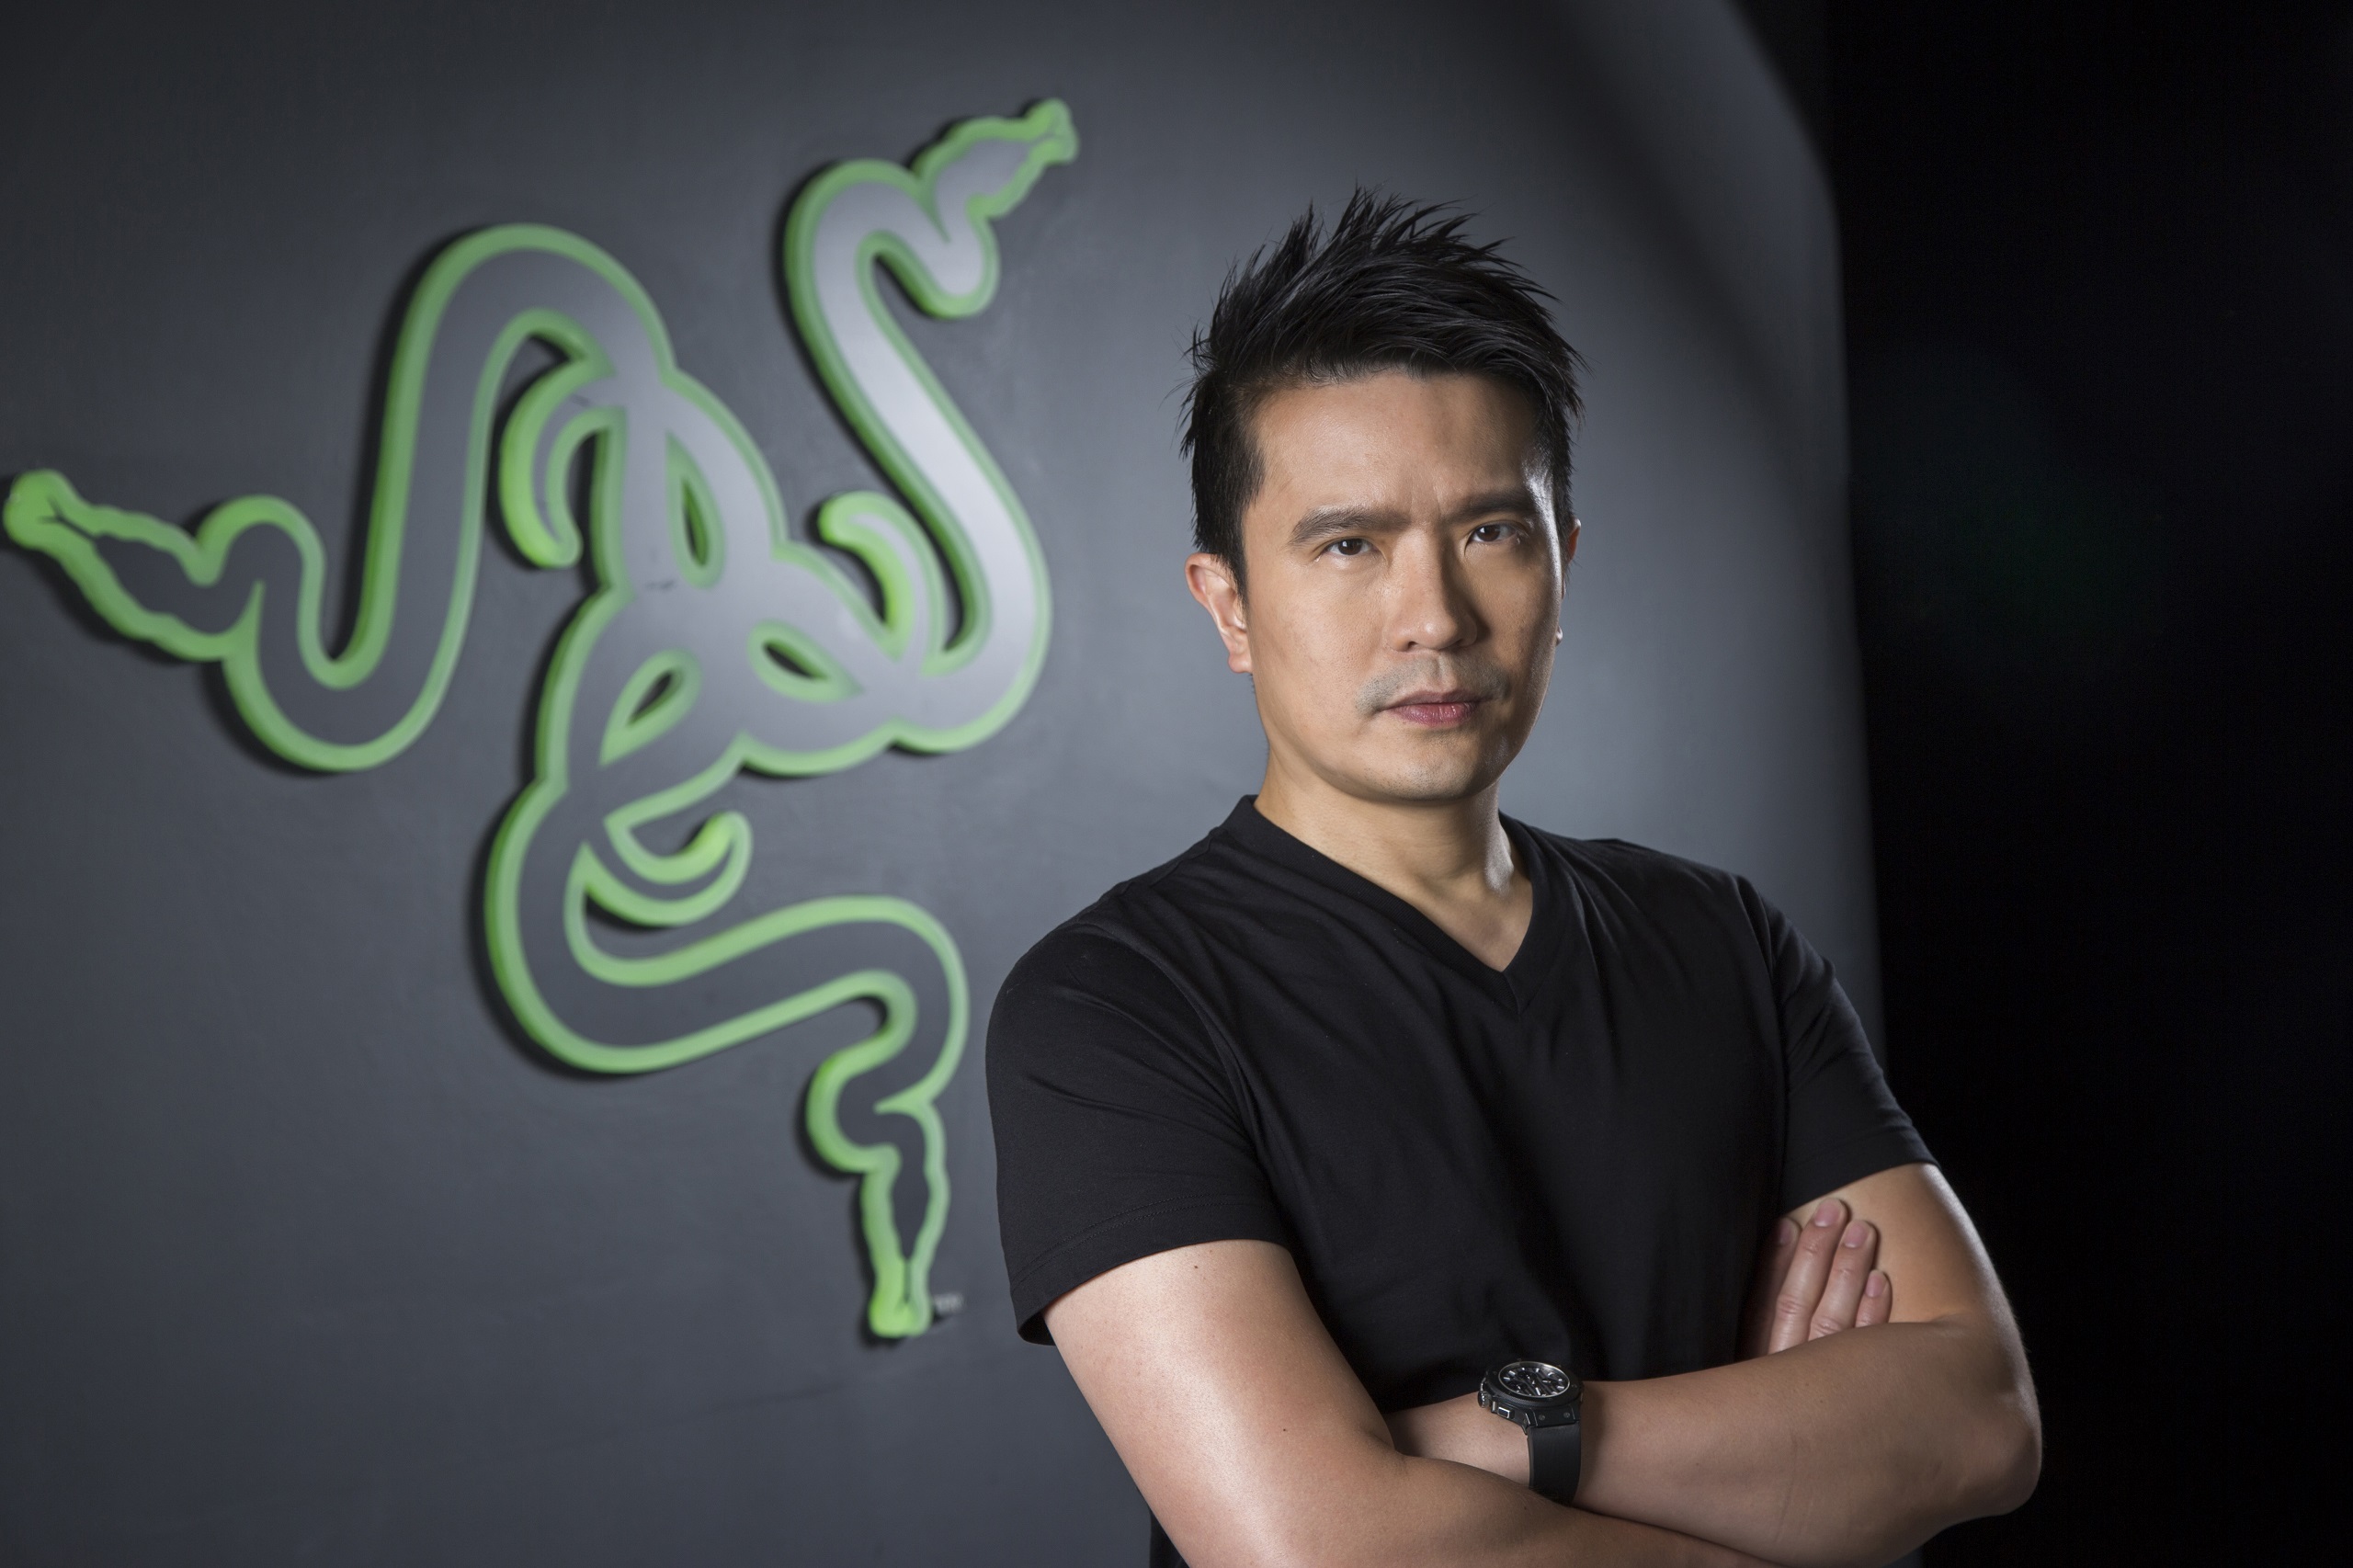 We are a lifestyle company, says Razer CEO